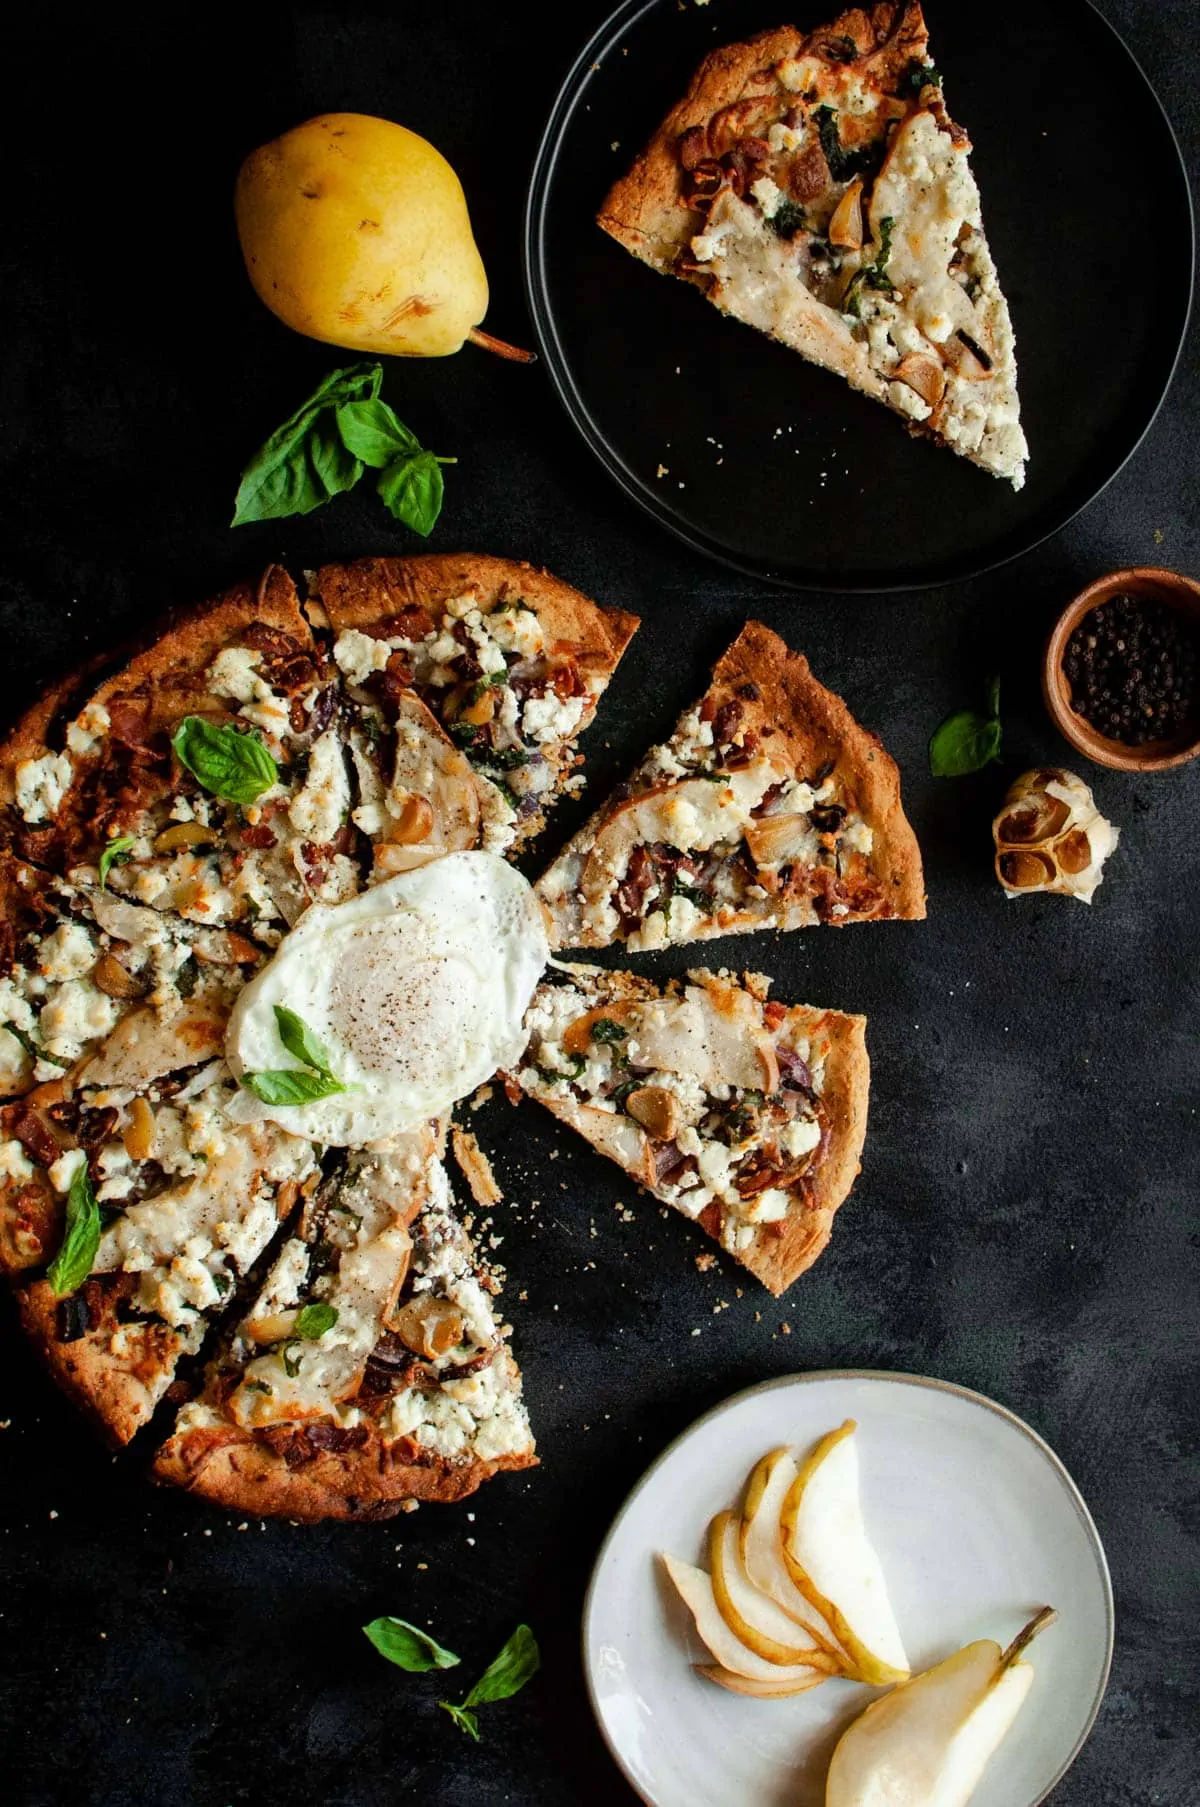 Goat Cheese & Pear Pizza With Caramelized Onions